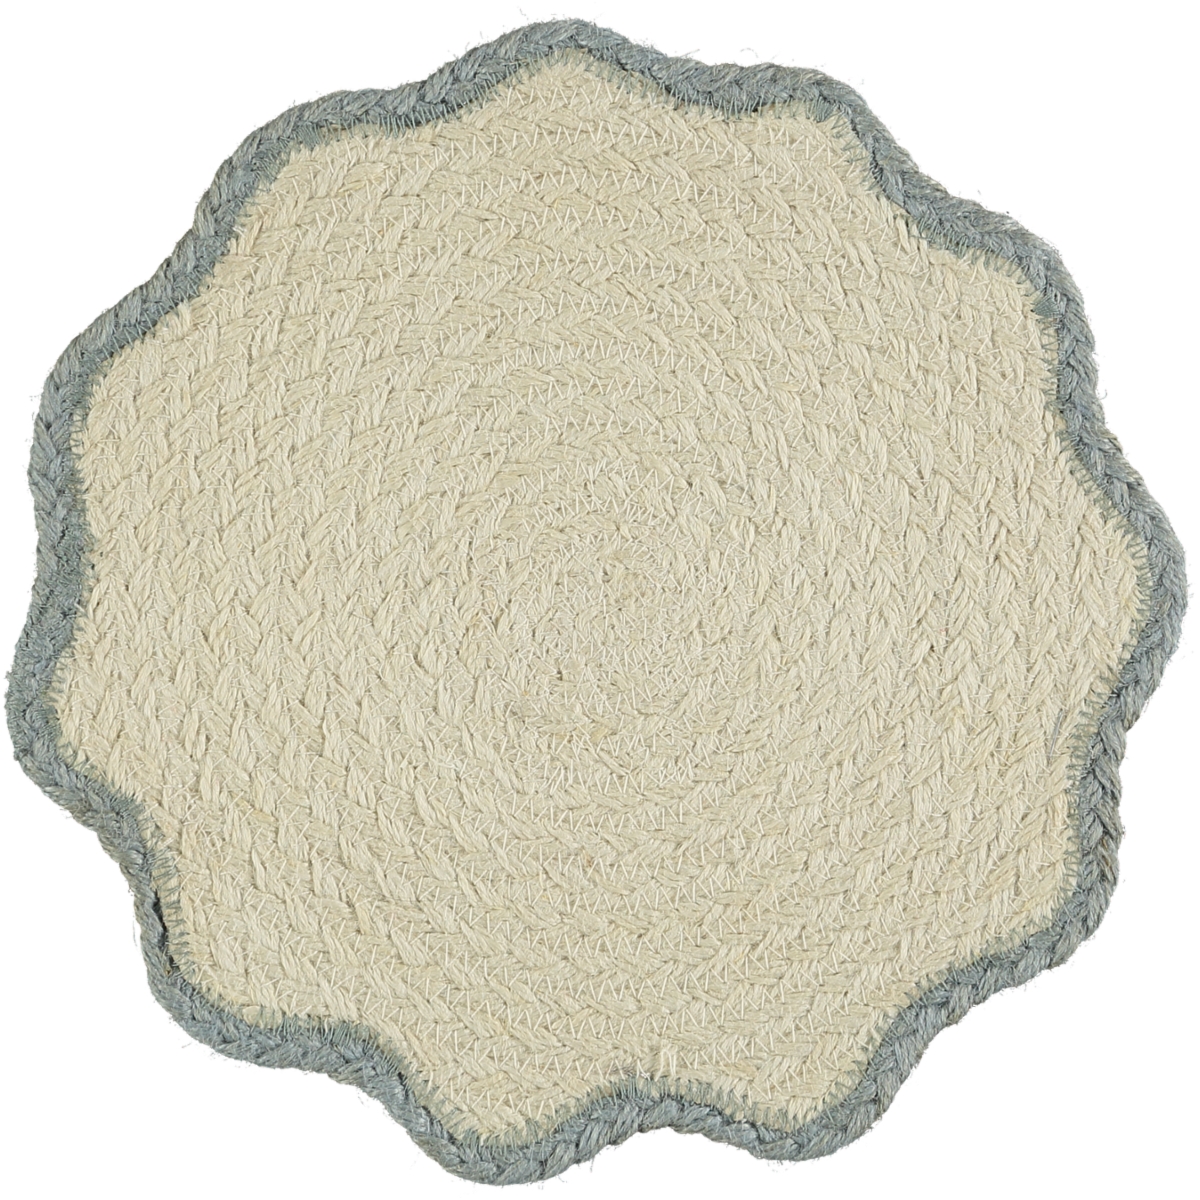 Set of 6 Pale Blue Bordered Basketed Placemats